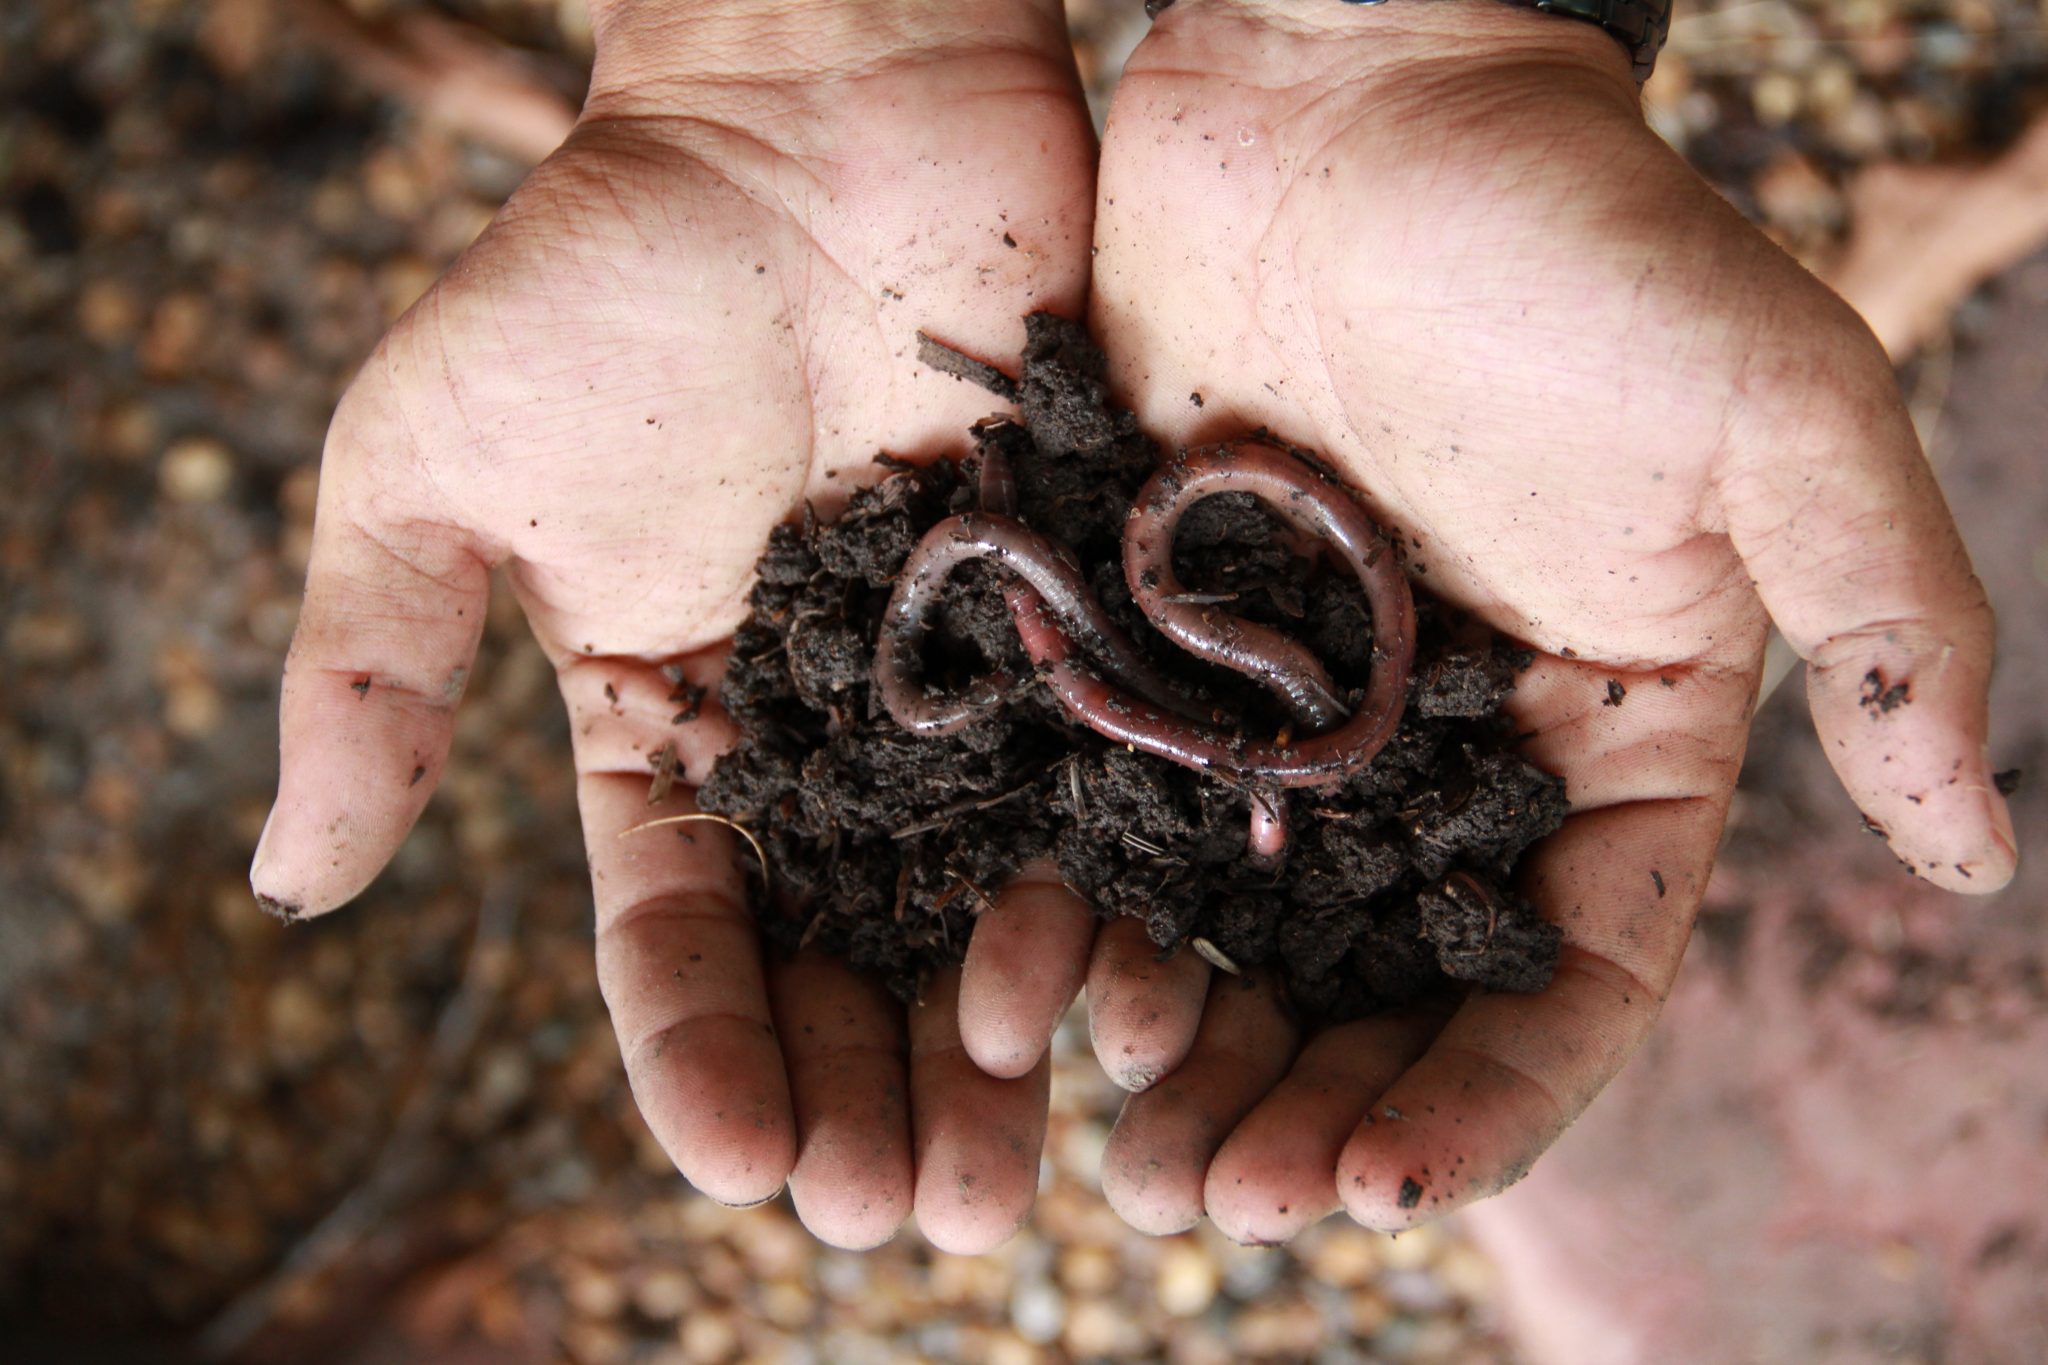 Healthy soils are important. Dirty hands hold an earthworm. Photo by shutterstock.com/Mama Belle Love kids.